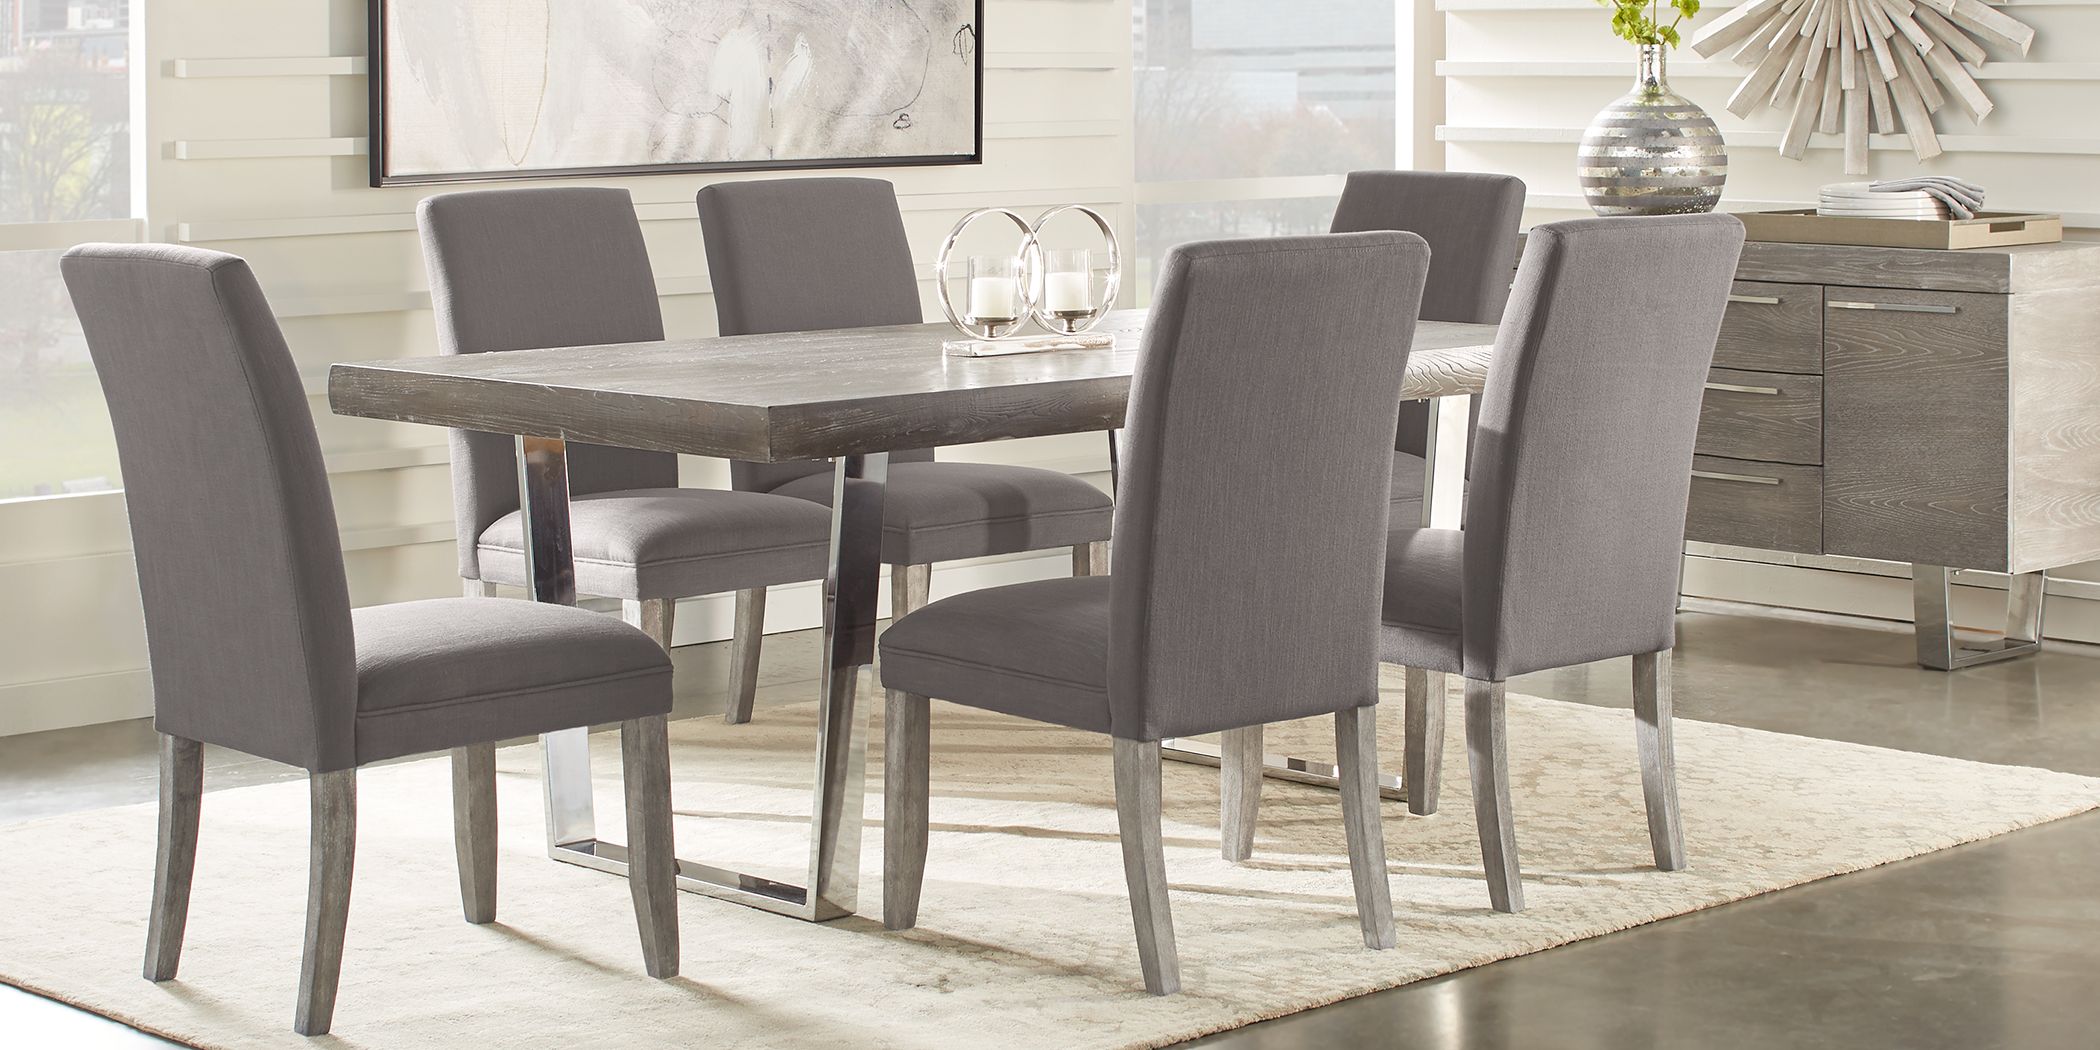 cindy crawford dining room chairs